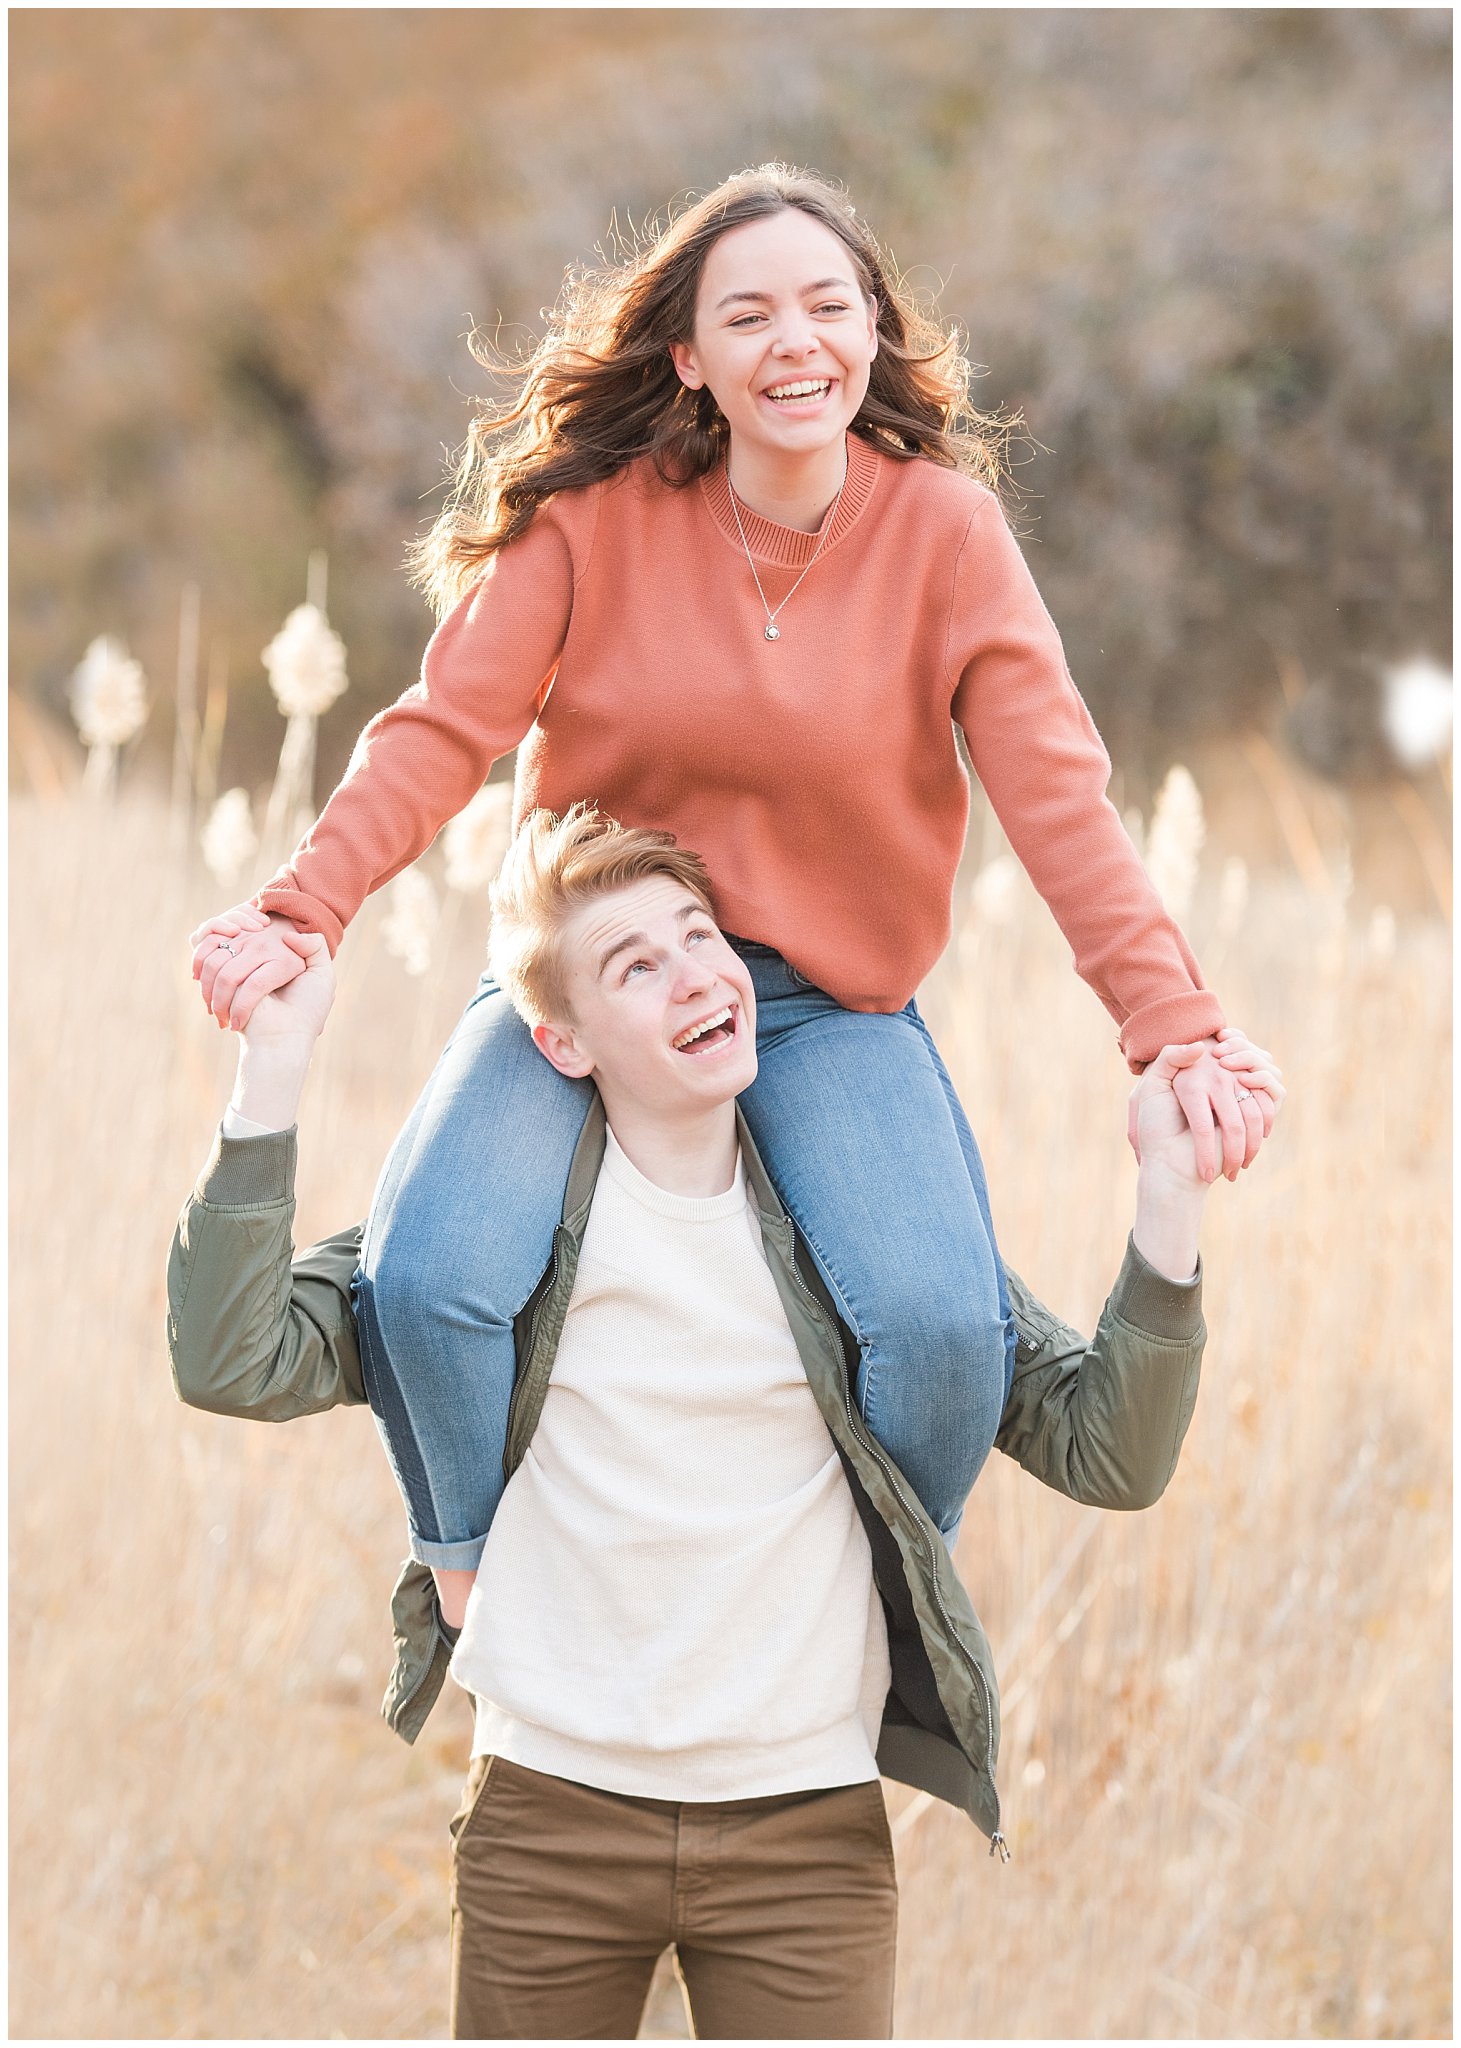 Couple during fall engagement session | Top Utah Wedding and Couples Photos 2019 | Jessie and Dallin Photography